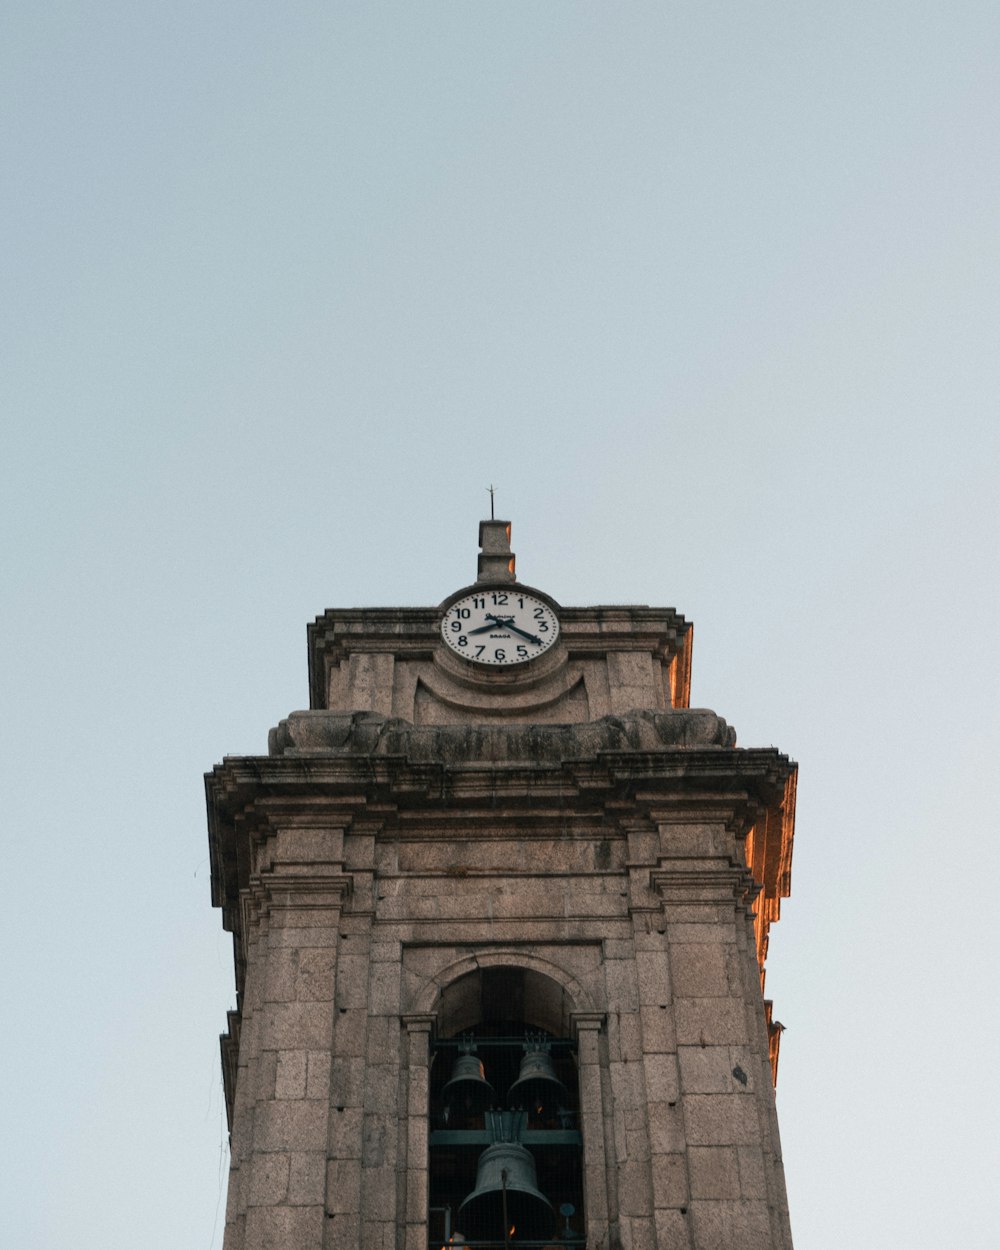 a bell tower with a clock on the top of it